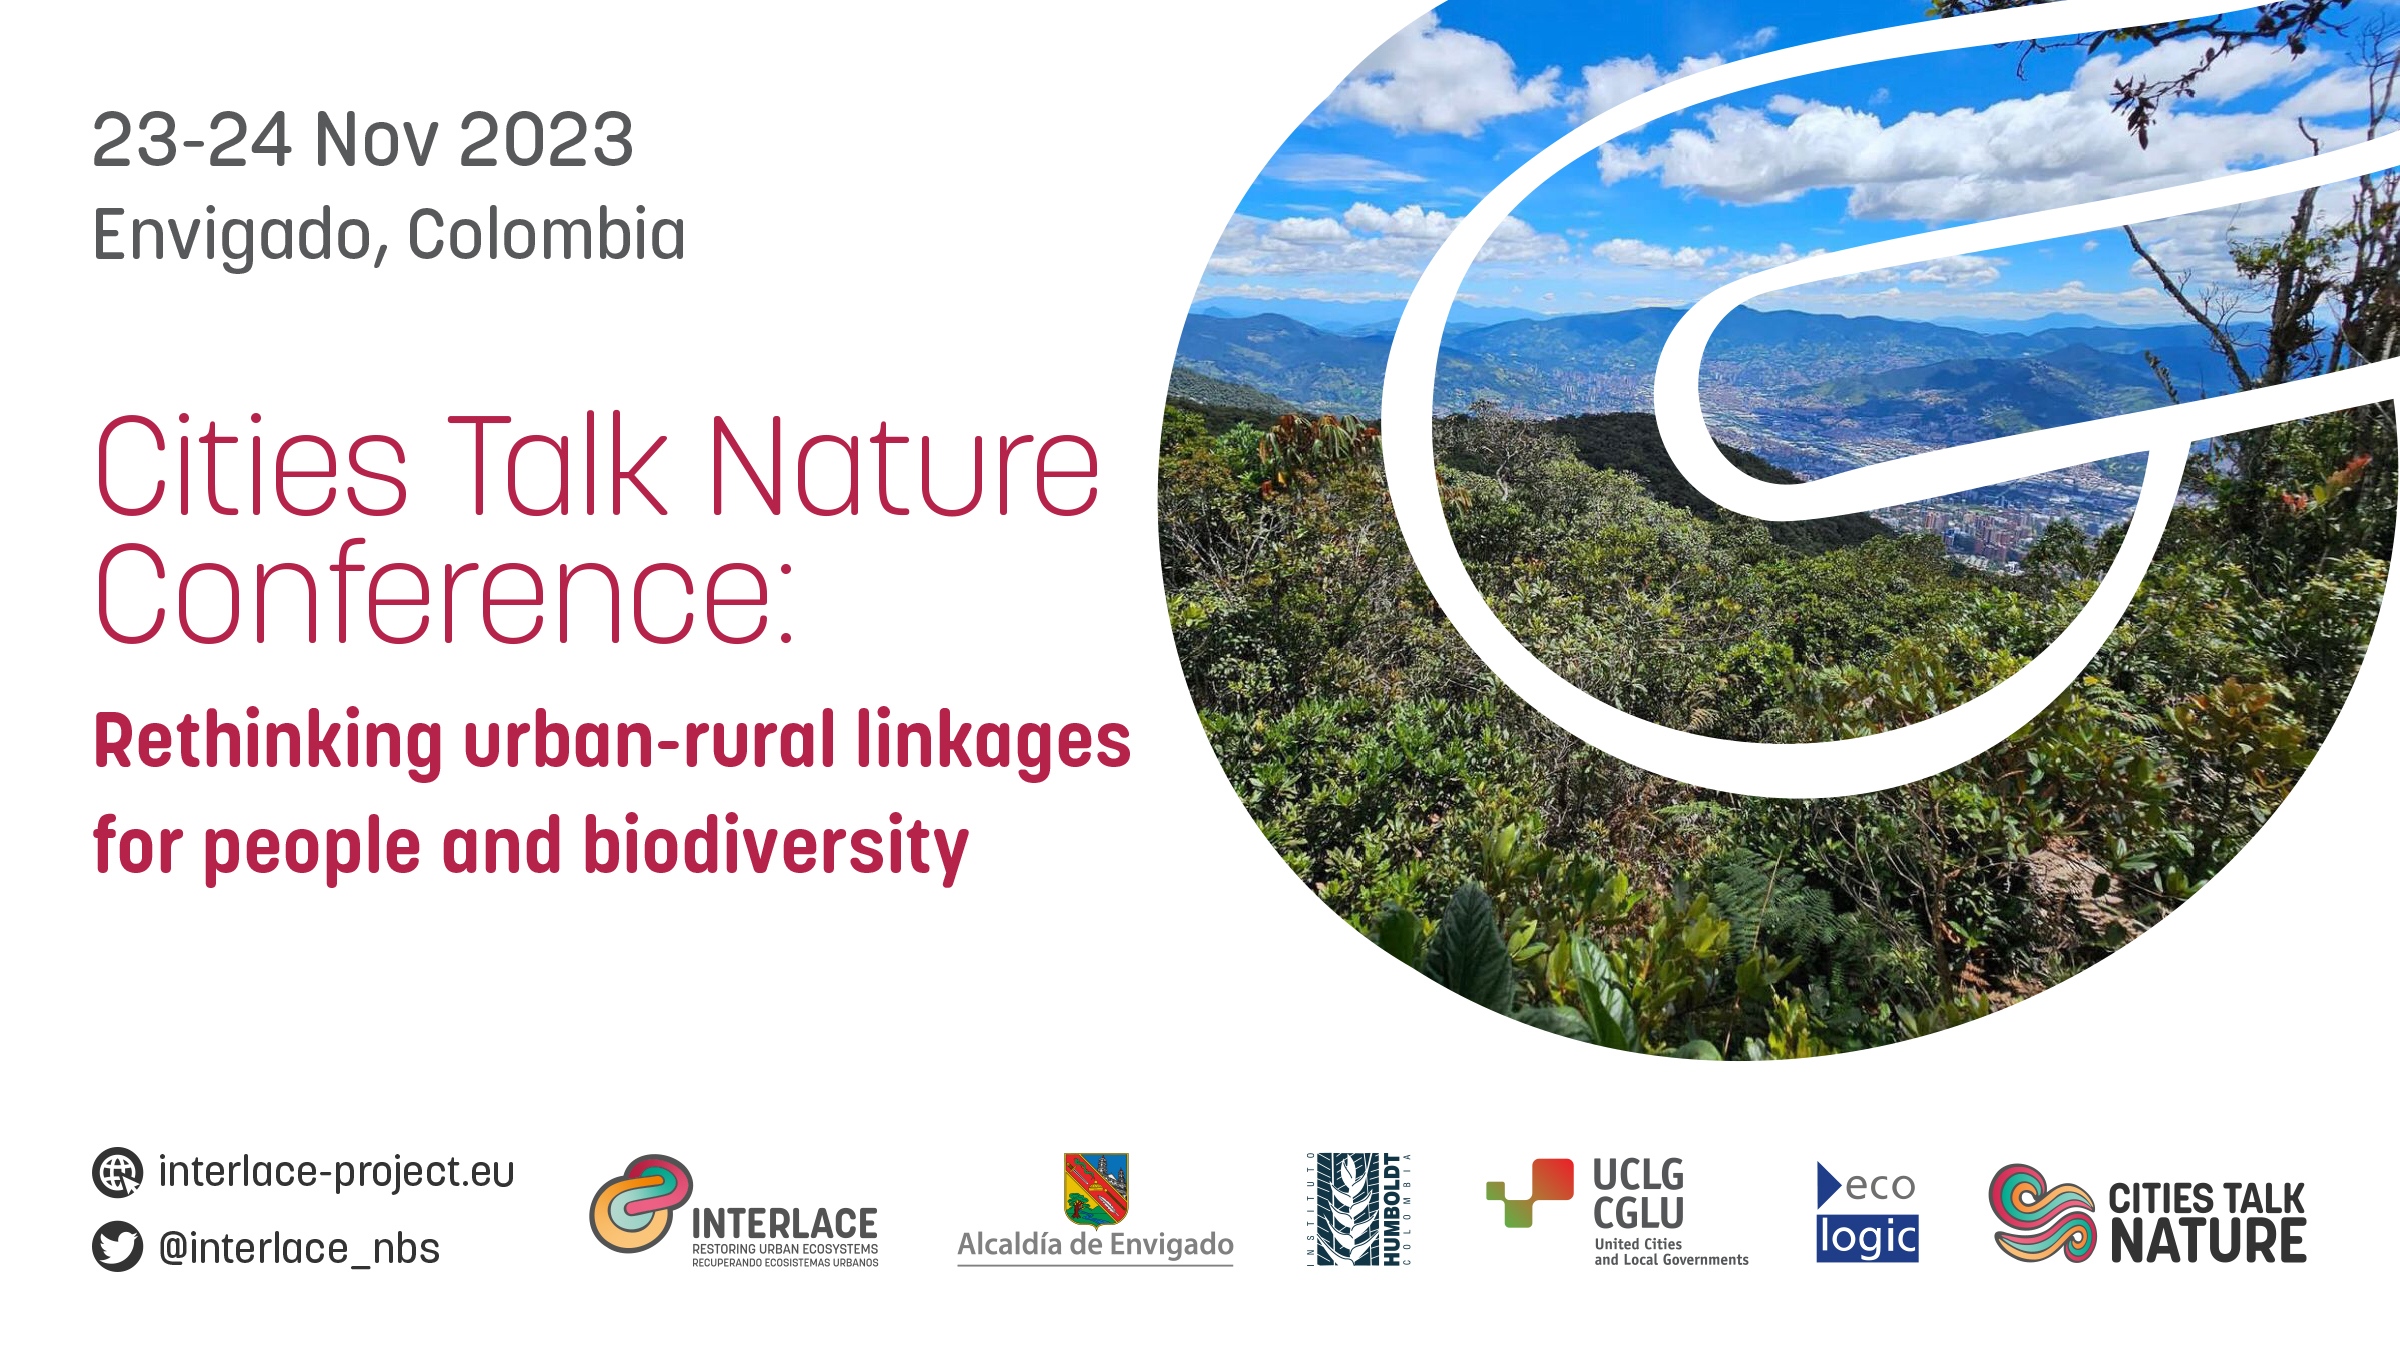 Social media card of the conference "Cities Talk Nature: Rethinking urban-rural linkages for people and biodiversity"